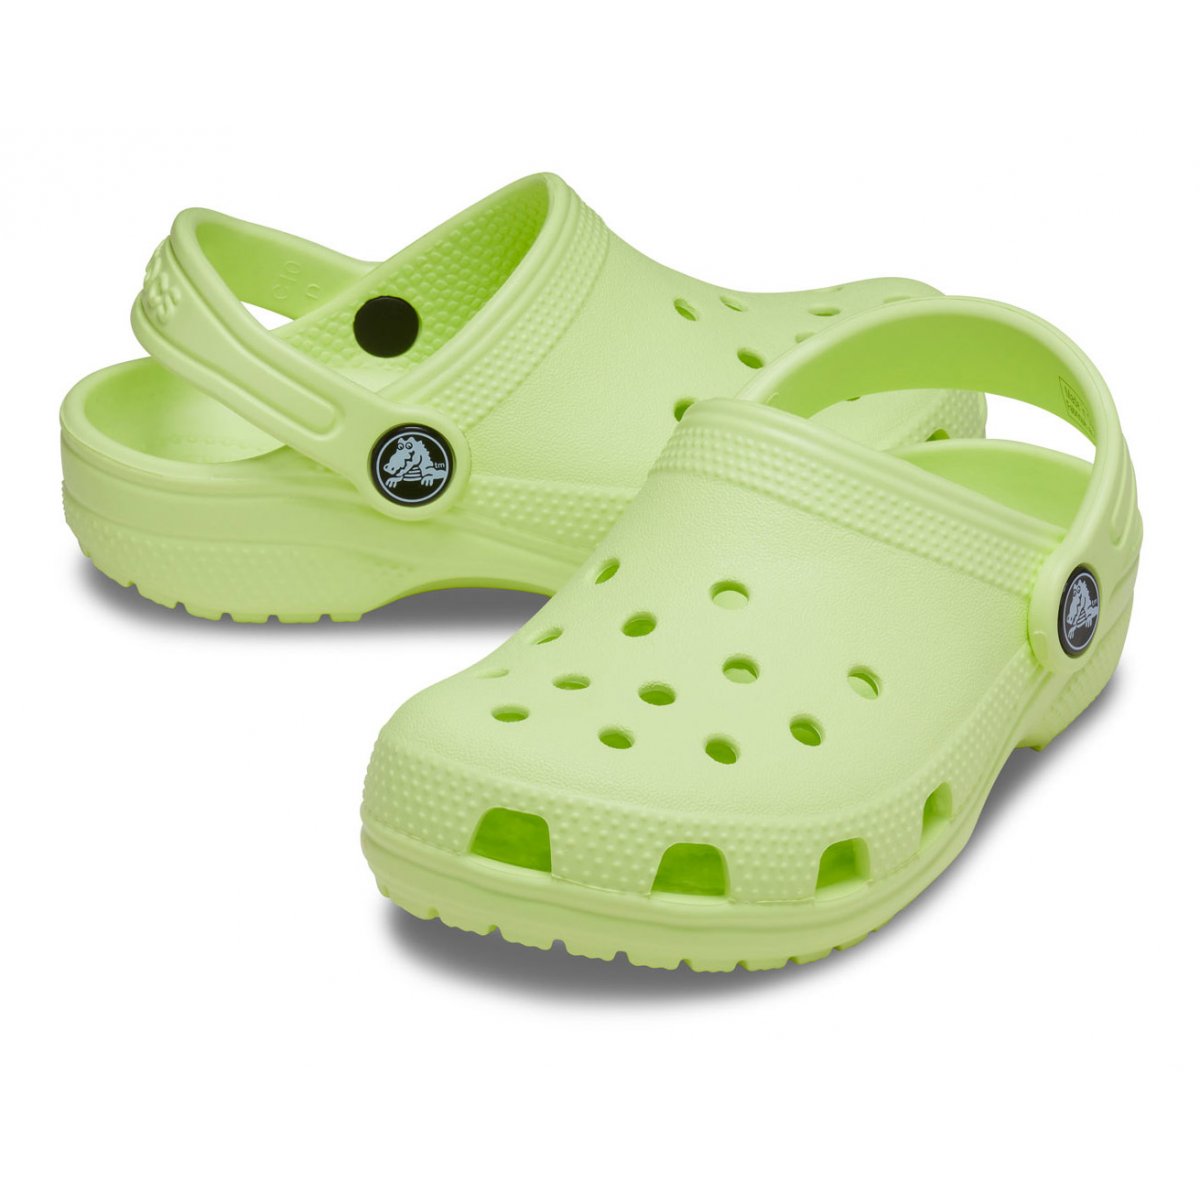 a pair of lime green crocs on a white background